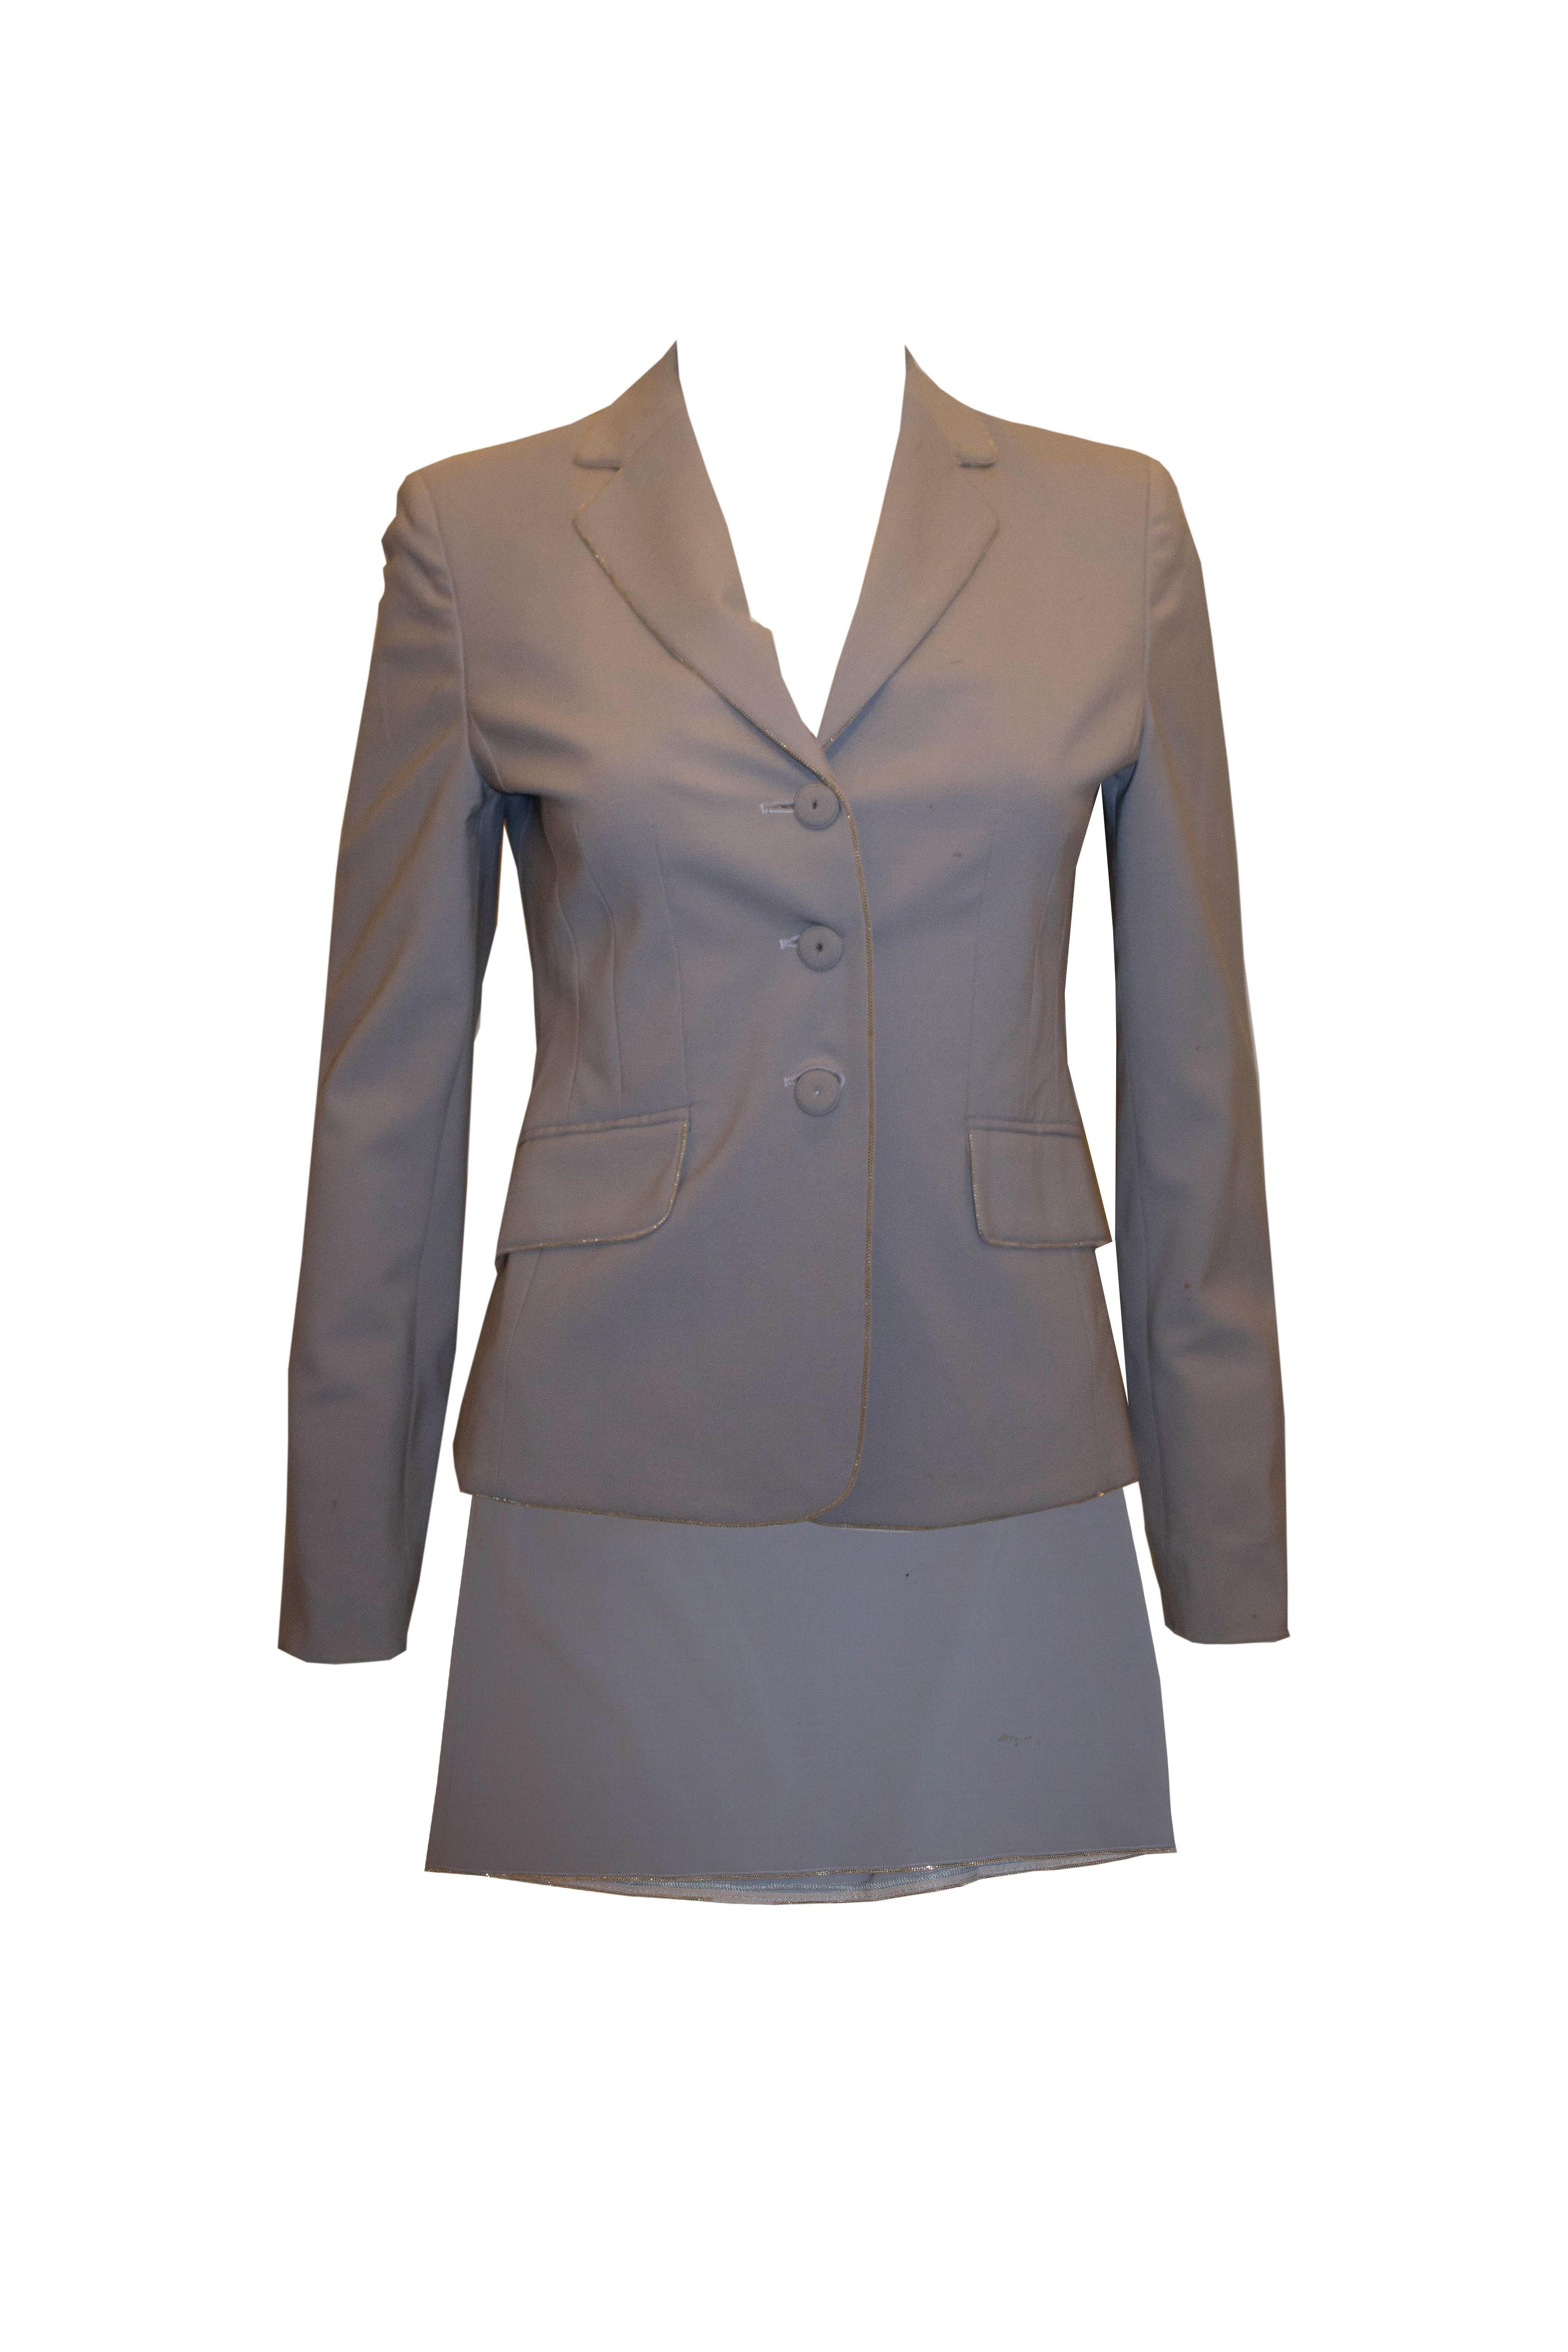 Gray Moschino Sky Blue Skirt Suit For Sale